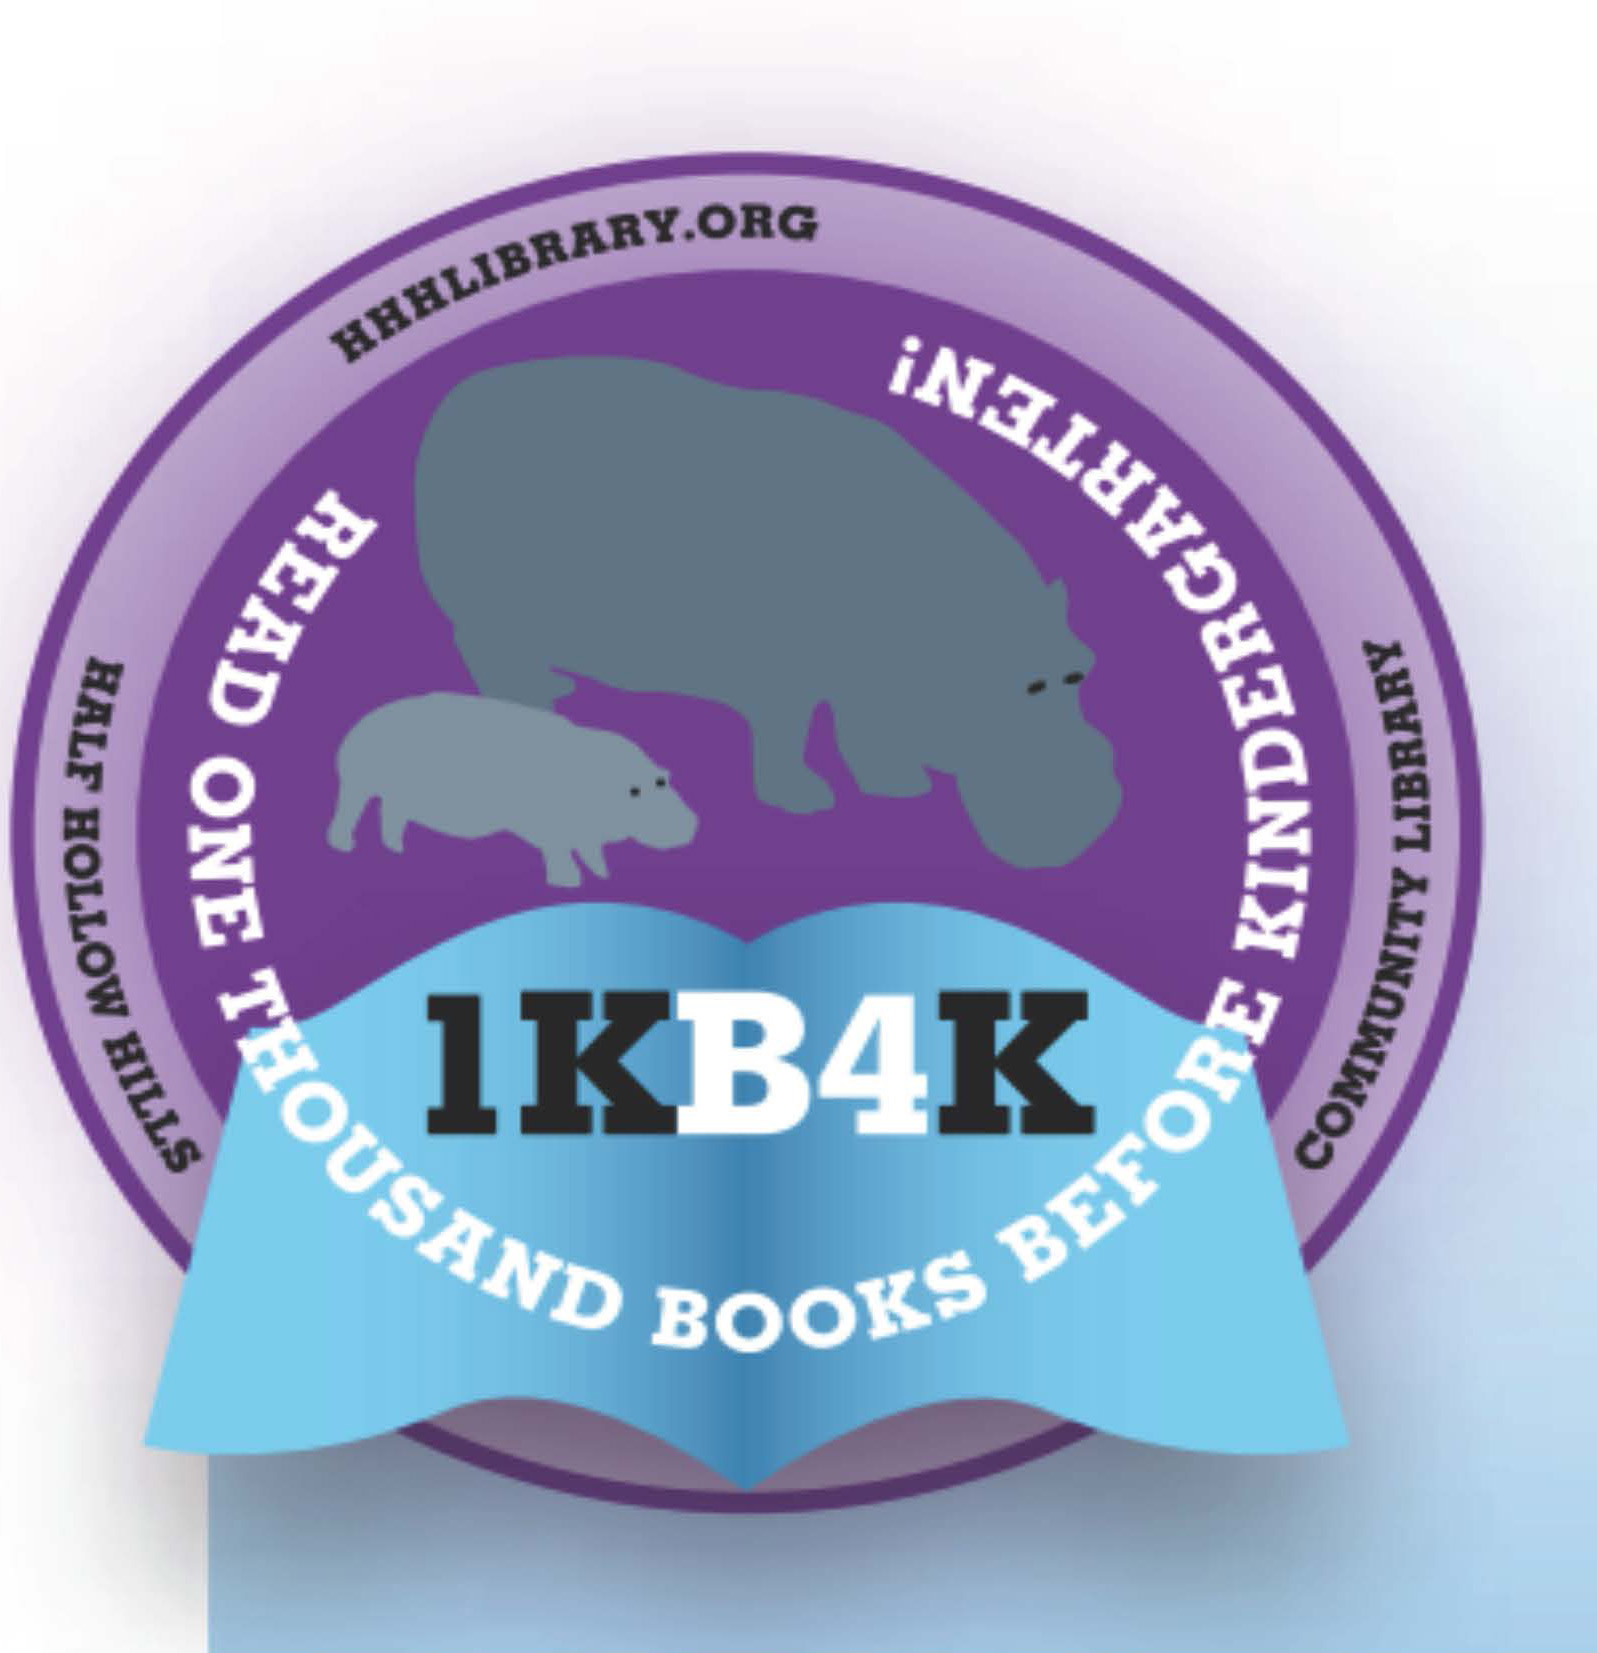 Half Hollow Hills Library graphic for 1KB4K featuring a circle with 2 hippos reading a book. 